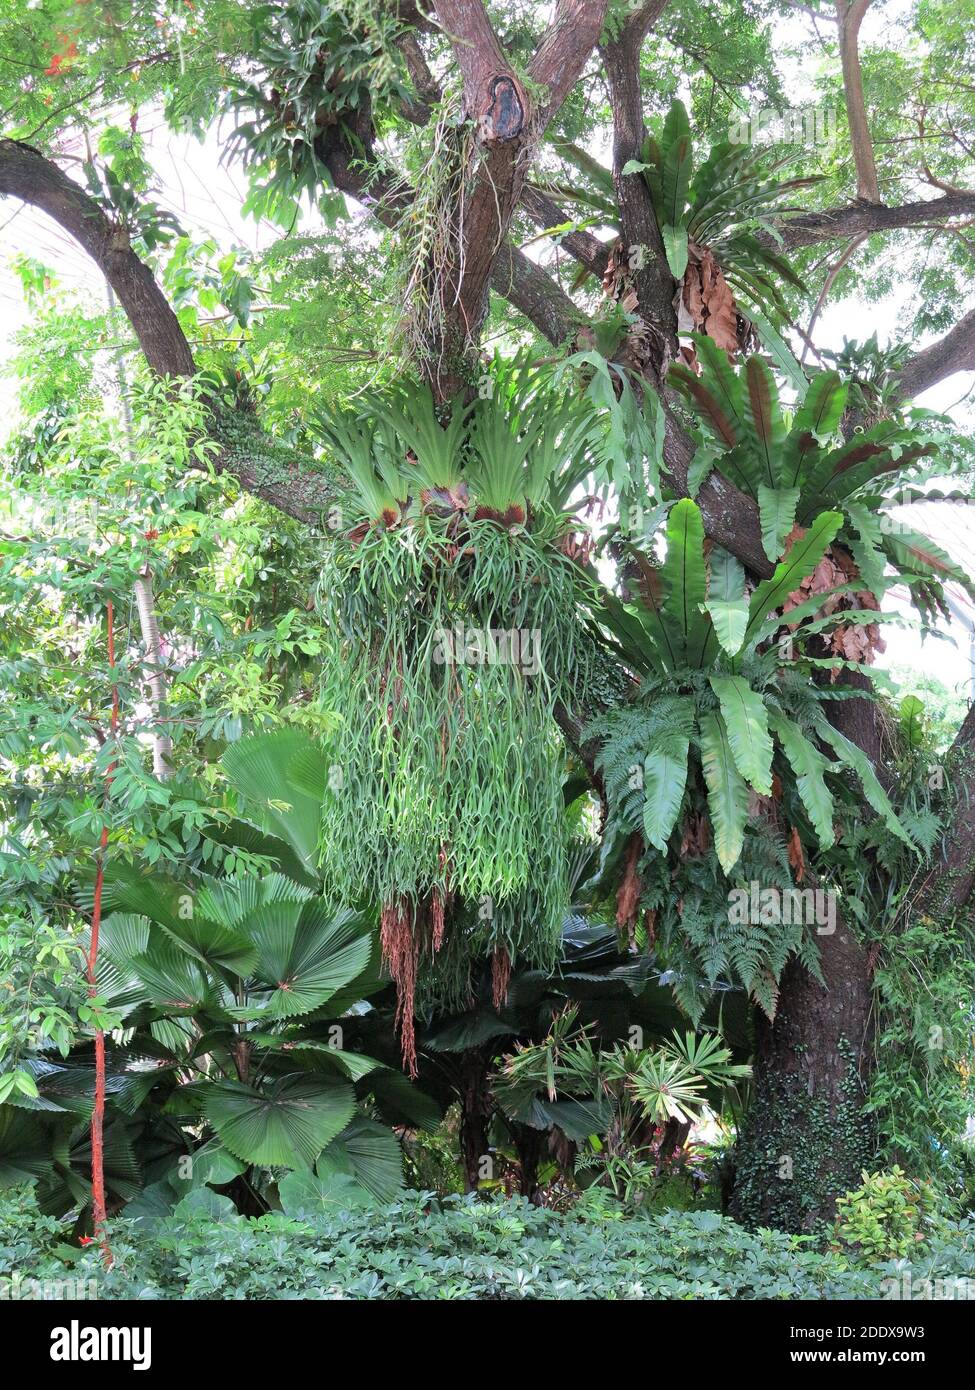 Epiphytic Ferns that grow naturally on trees, Platycerium bifurcatum (Elkhorn Fern), and others. Stock Photo